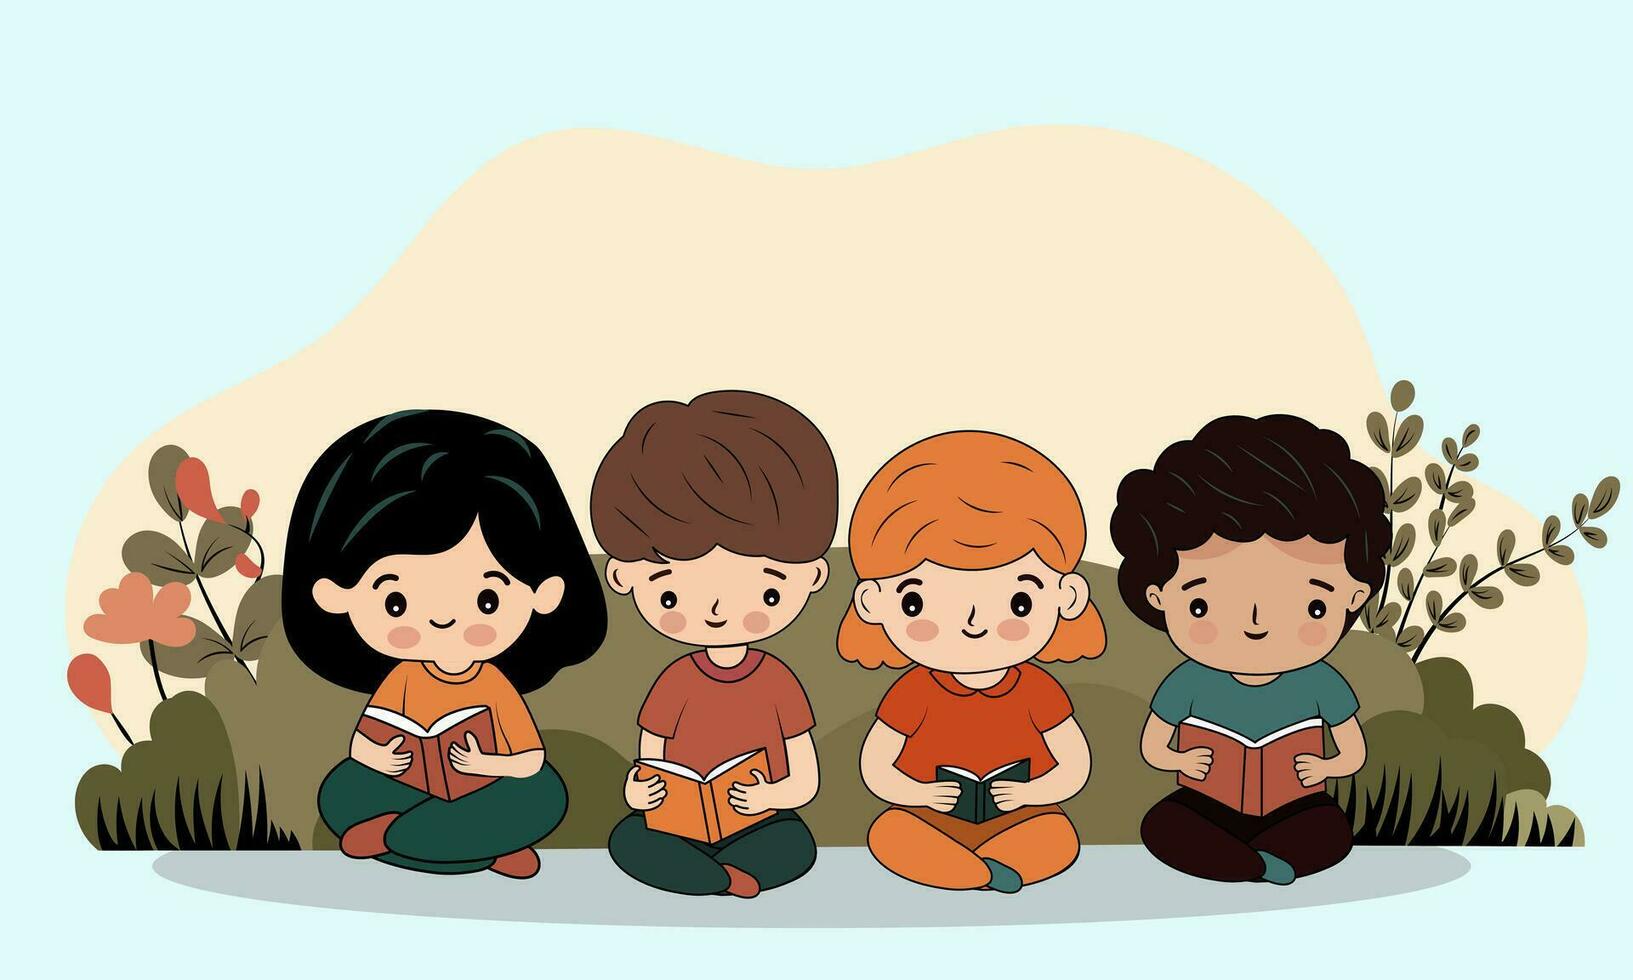 Children Characters  Reading Books In Sitting Pose Against Nature Background. vector